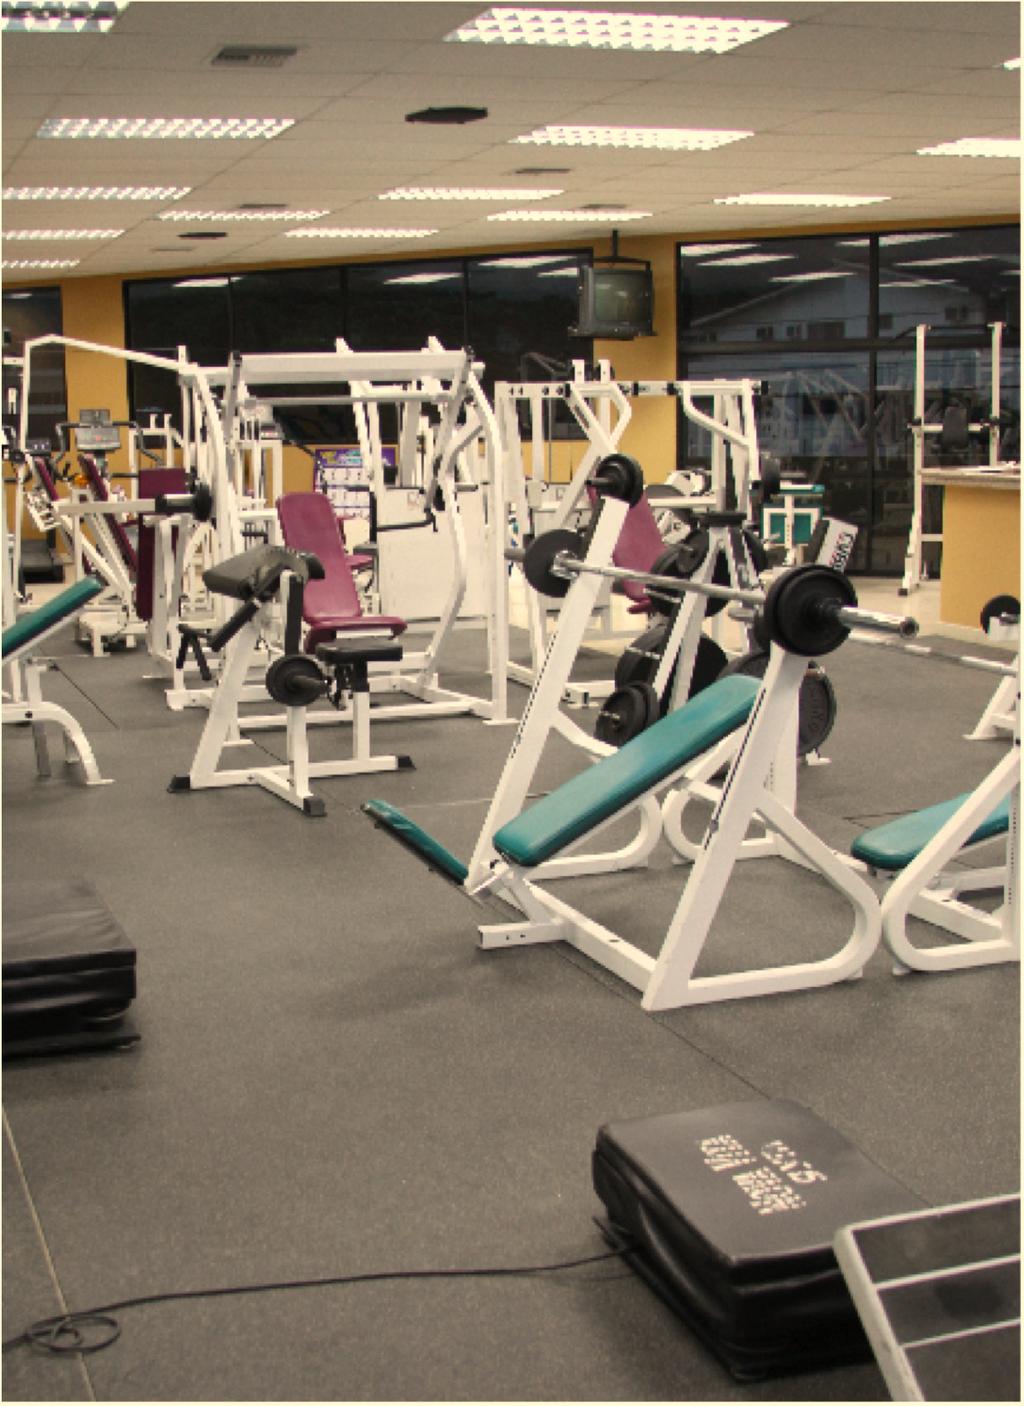 Currently, this is our state-of-the-art gym with high-tech equipment, vibration plates, and machines that have